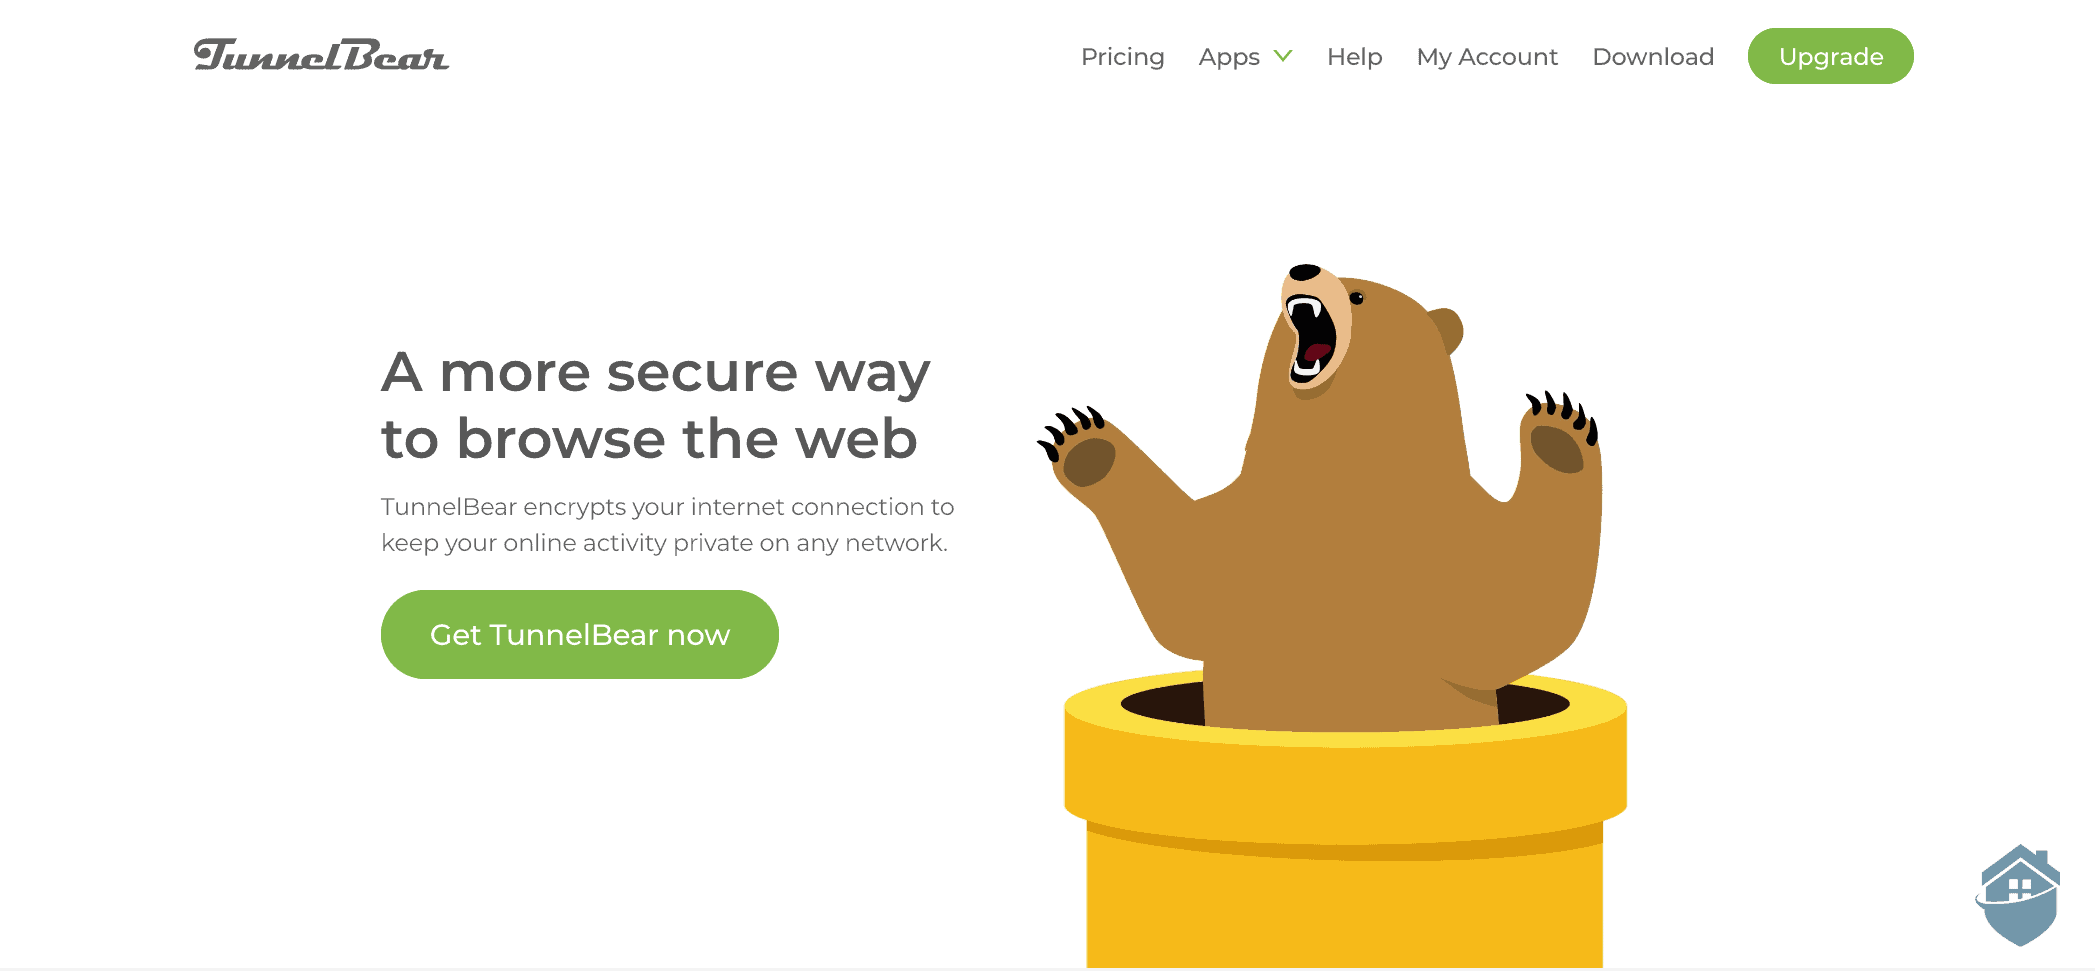 When you subscribe to TunnelBear, expect to see plenty of brown bears